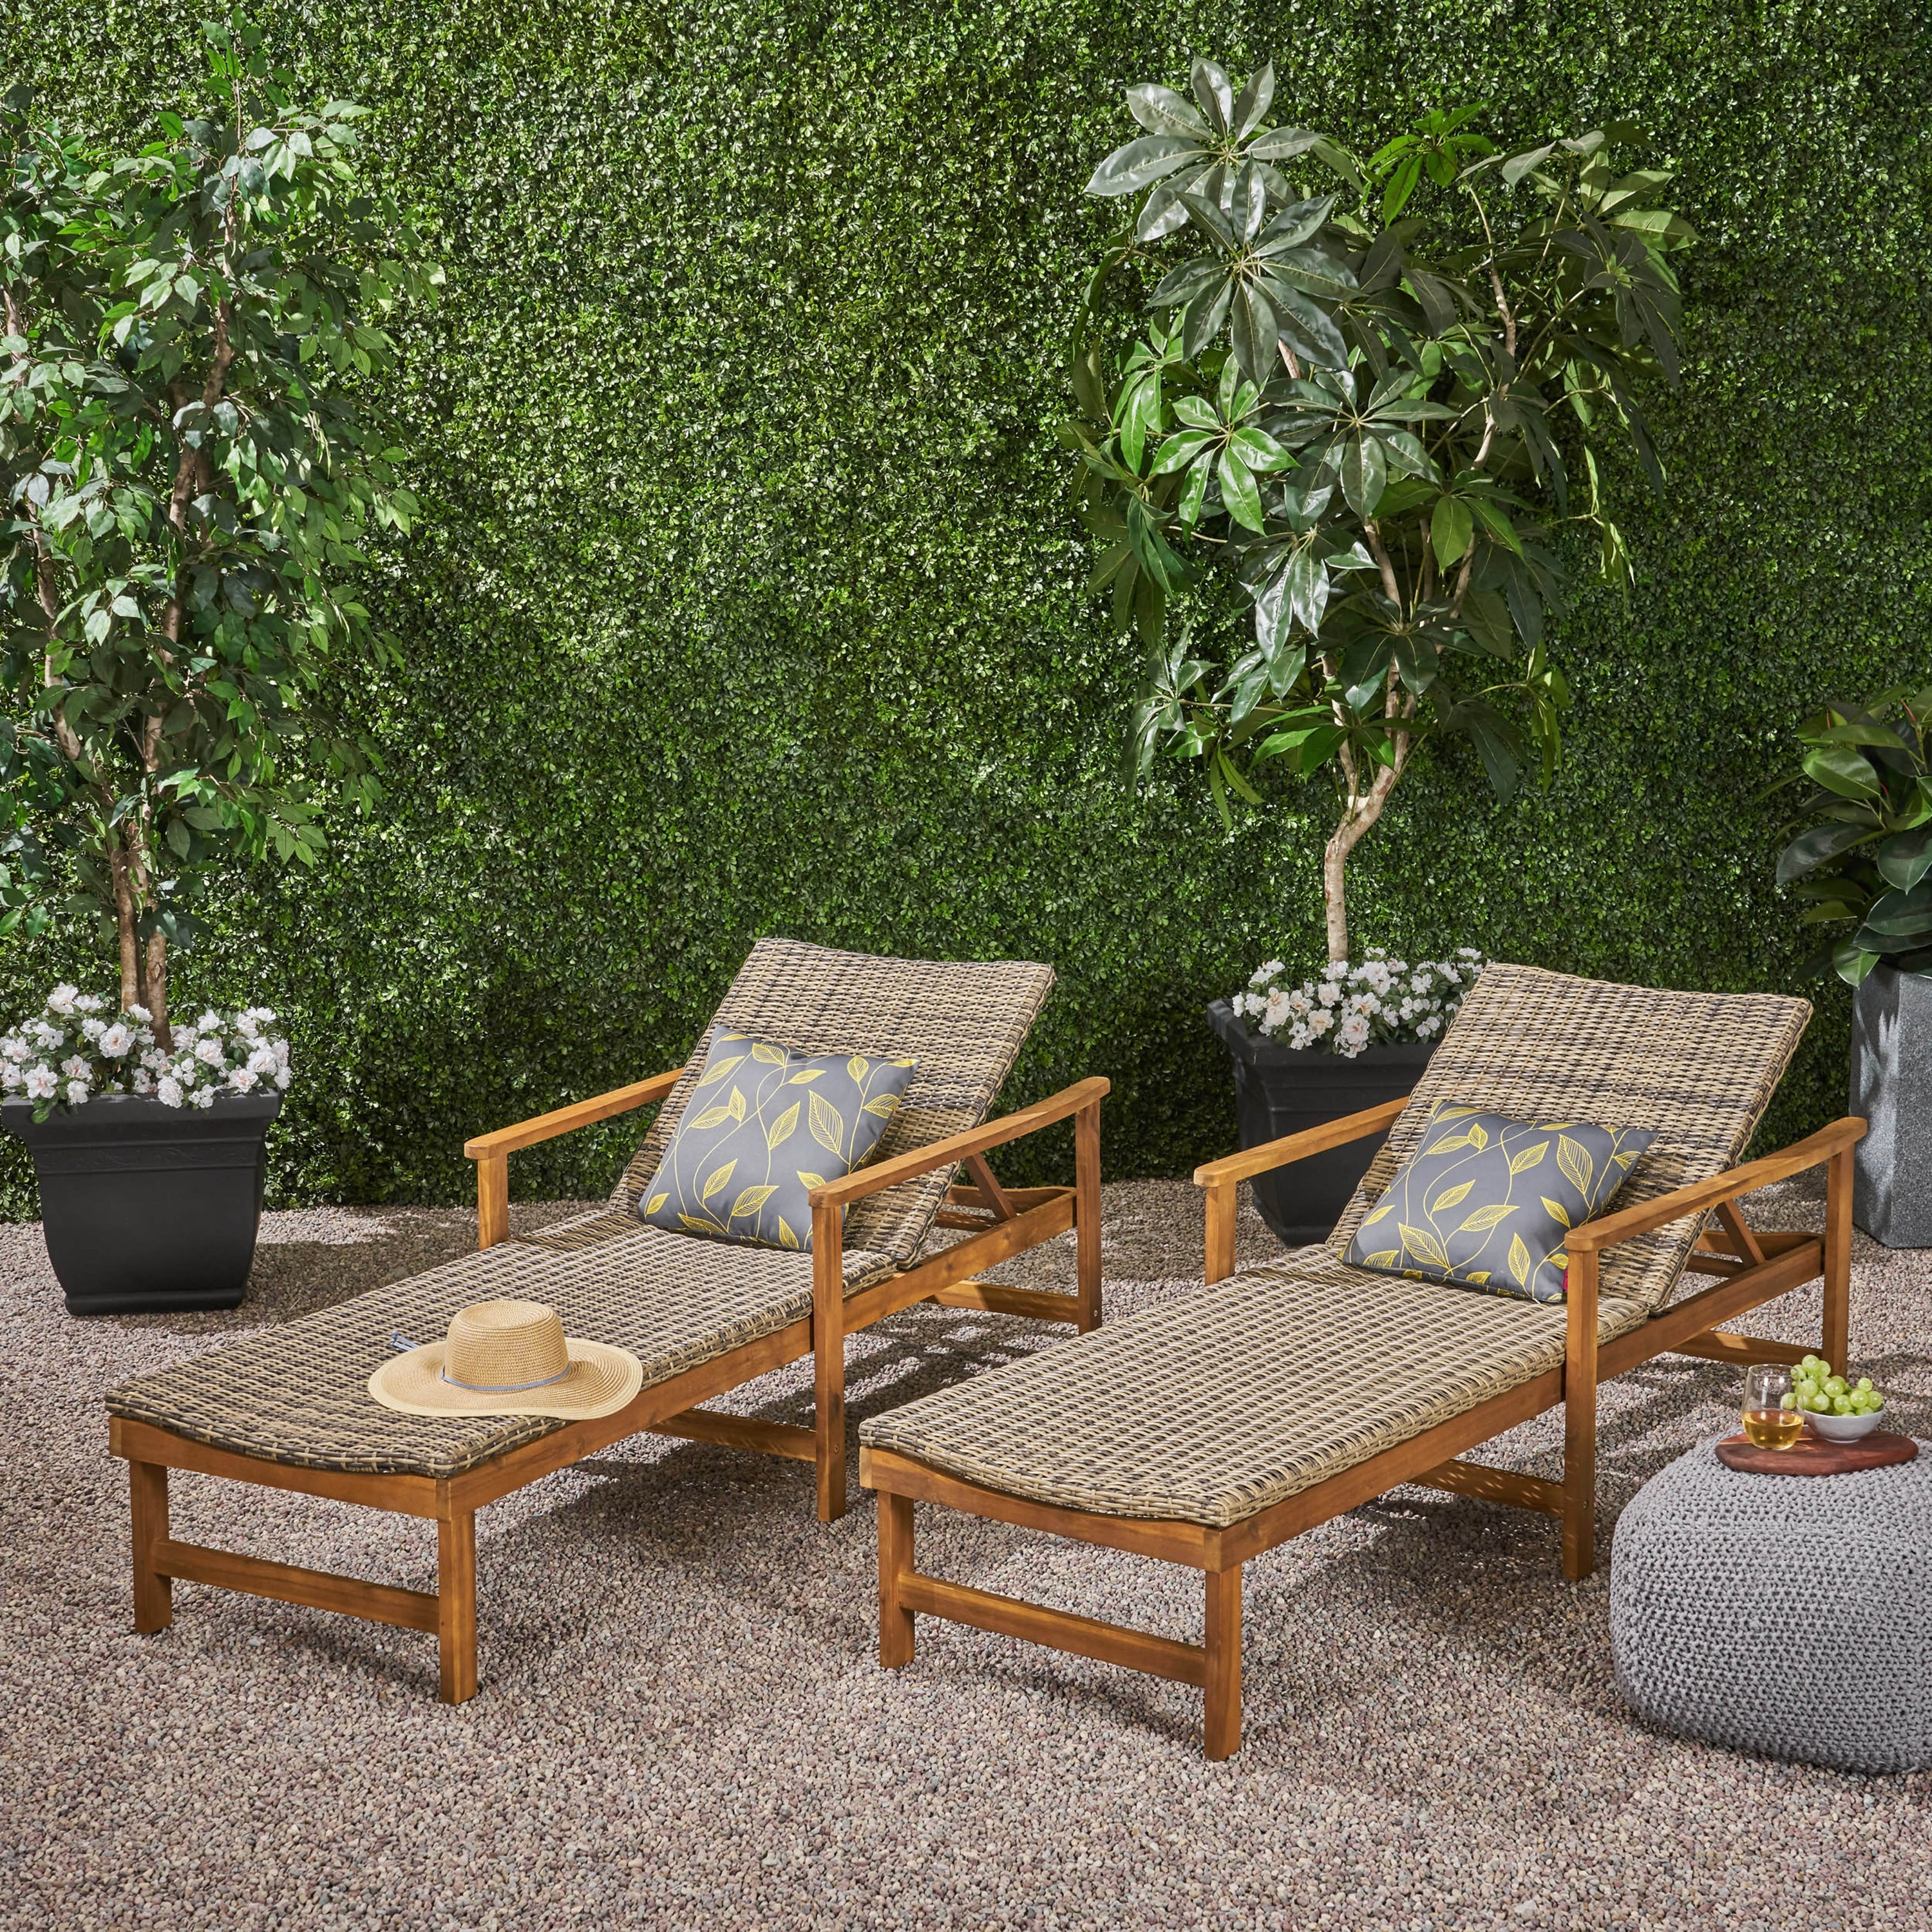 Christopher Knight Home Hampton Outdoor Rustic Acacia Wood Chaise Lounge with Wicker Seating (Set of 2) by  natural + mixed mocha - image 2 of 5